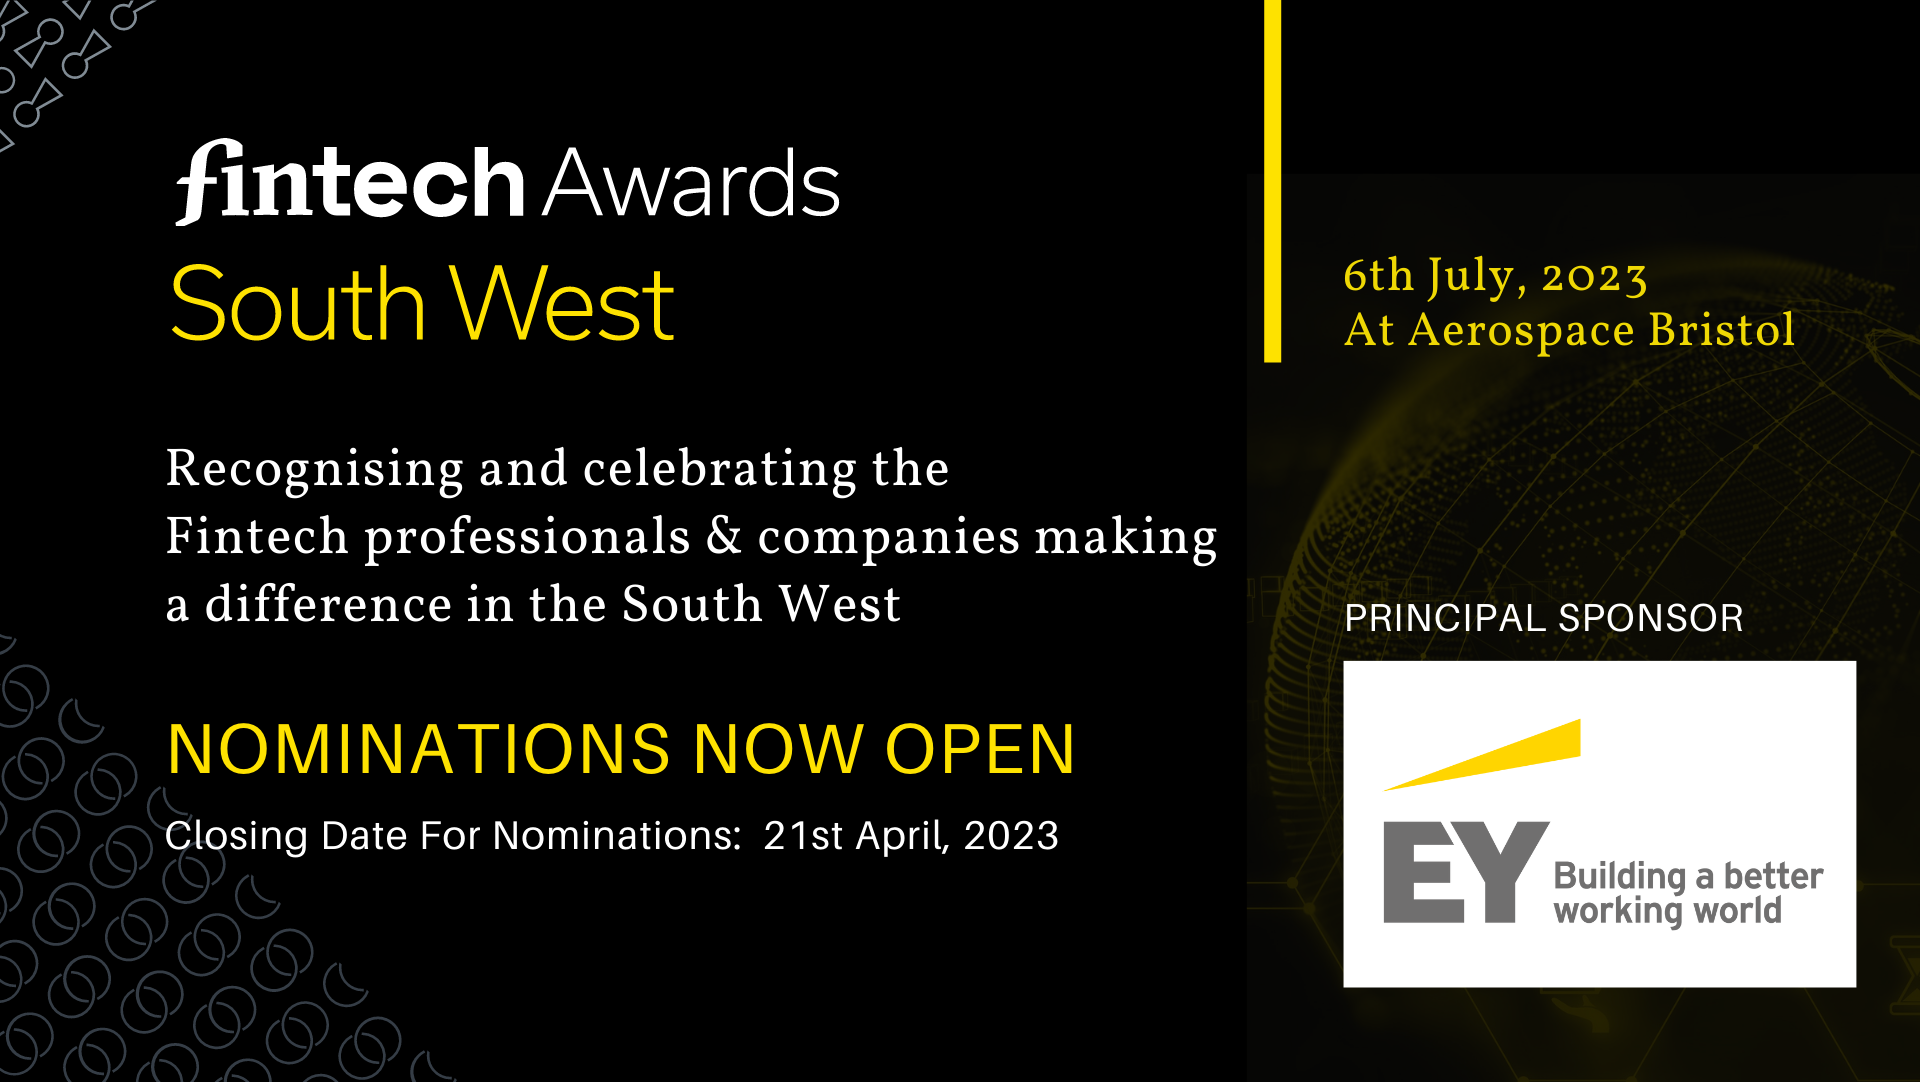 Fintech Awards South West launches with principal sponsor EY to celebrate innovation in the region